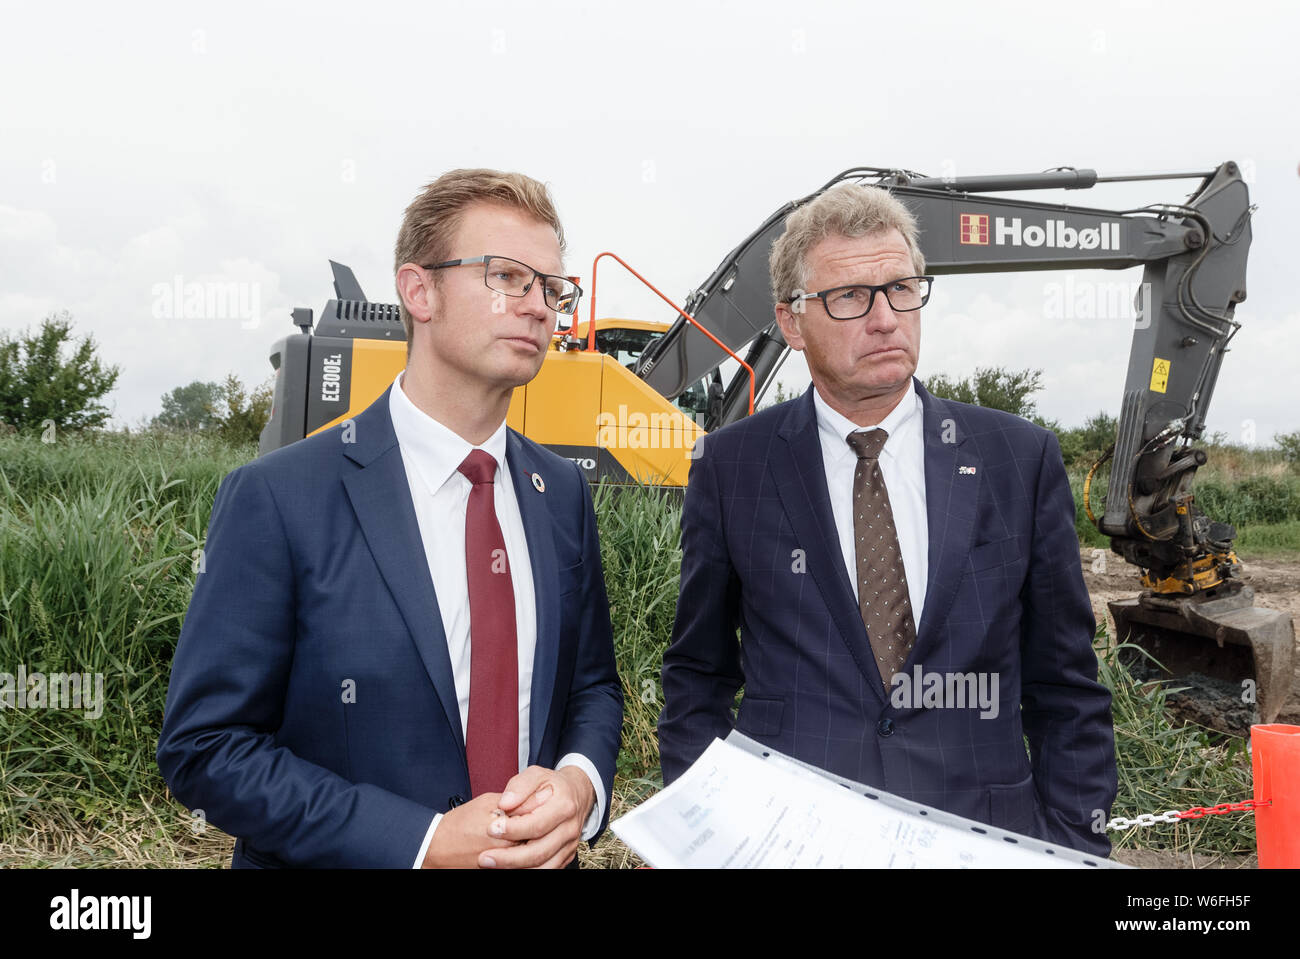 01 August 2019, Denmark, Rødbyhavn: Benny Engelbrecht (l), Minister of Transport of Denmark and Bernd Buchholz (FDP), Minister of Economic Affairs of Schleswig-Holstein, jointly visit the construction site of the planned Fehmarnbelt tunnel. Photo: Markus Scholz/dpa Stock Photo